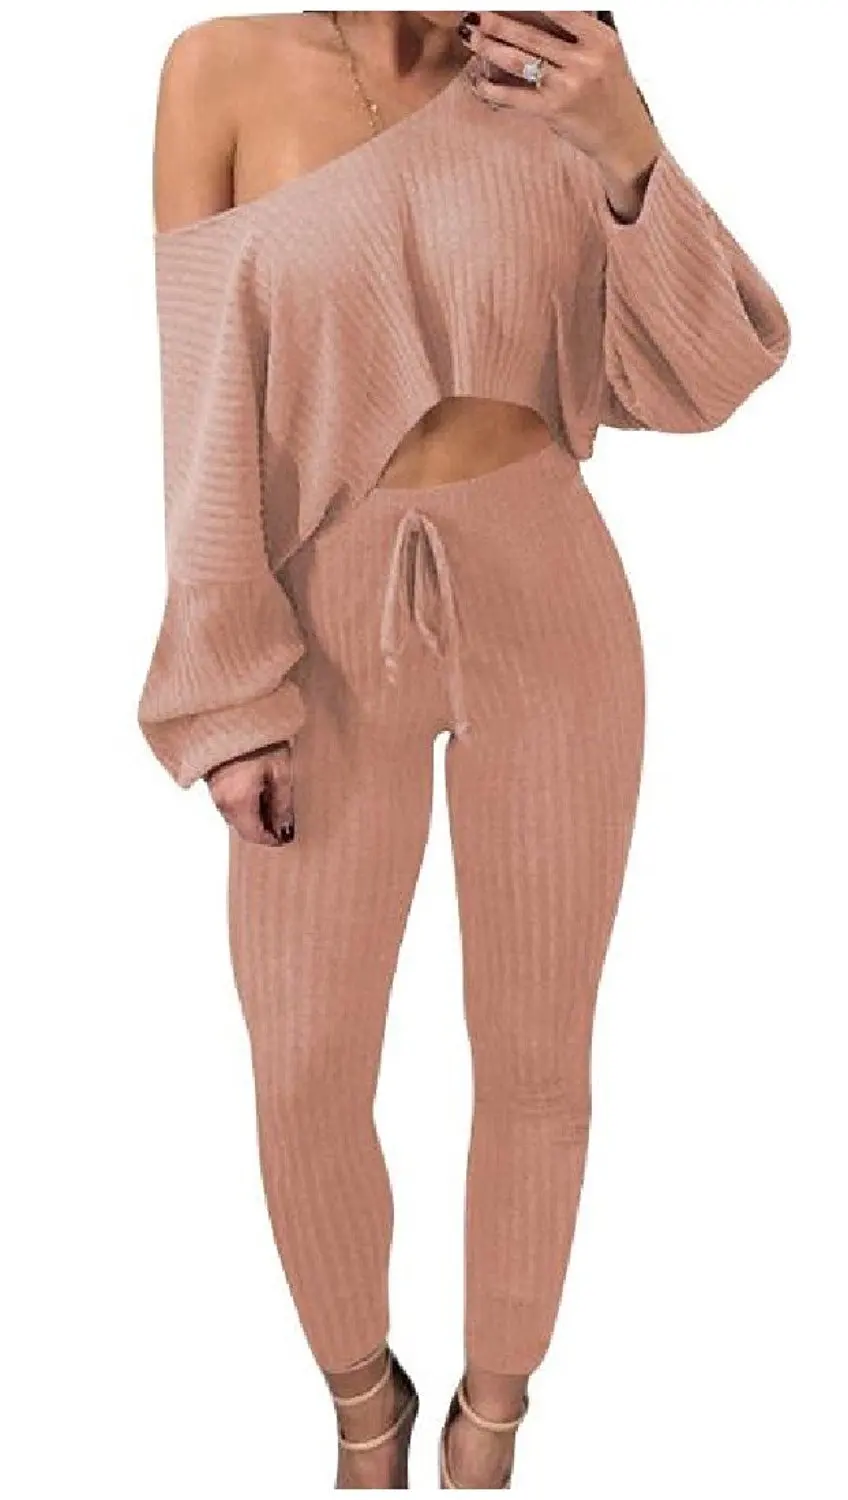 Cheap Love Pink Tracksuits, find Love Pink Tracksuits deals on line at